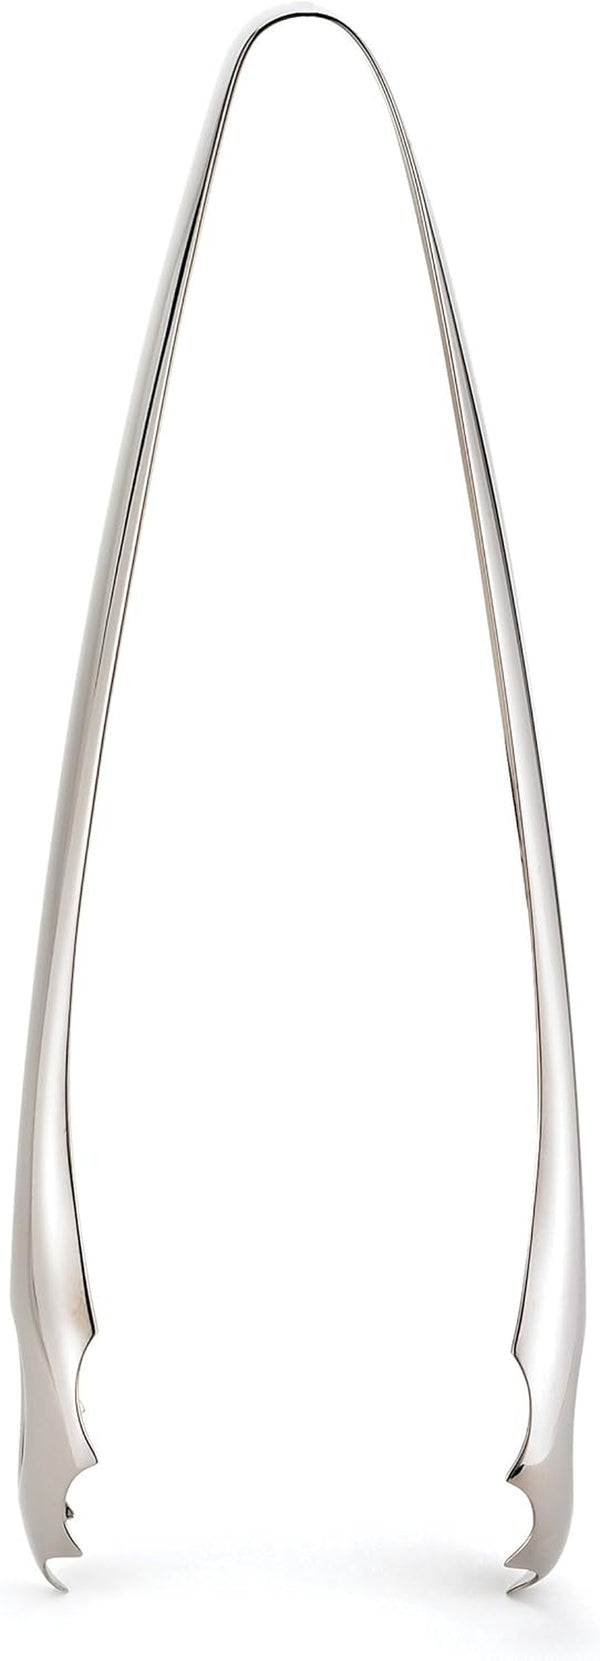 Browne & Co Cuisipro 7-Inch Ice Tongs